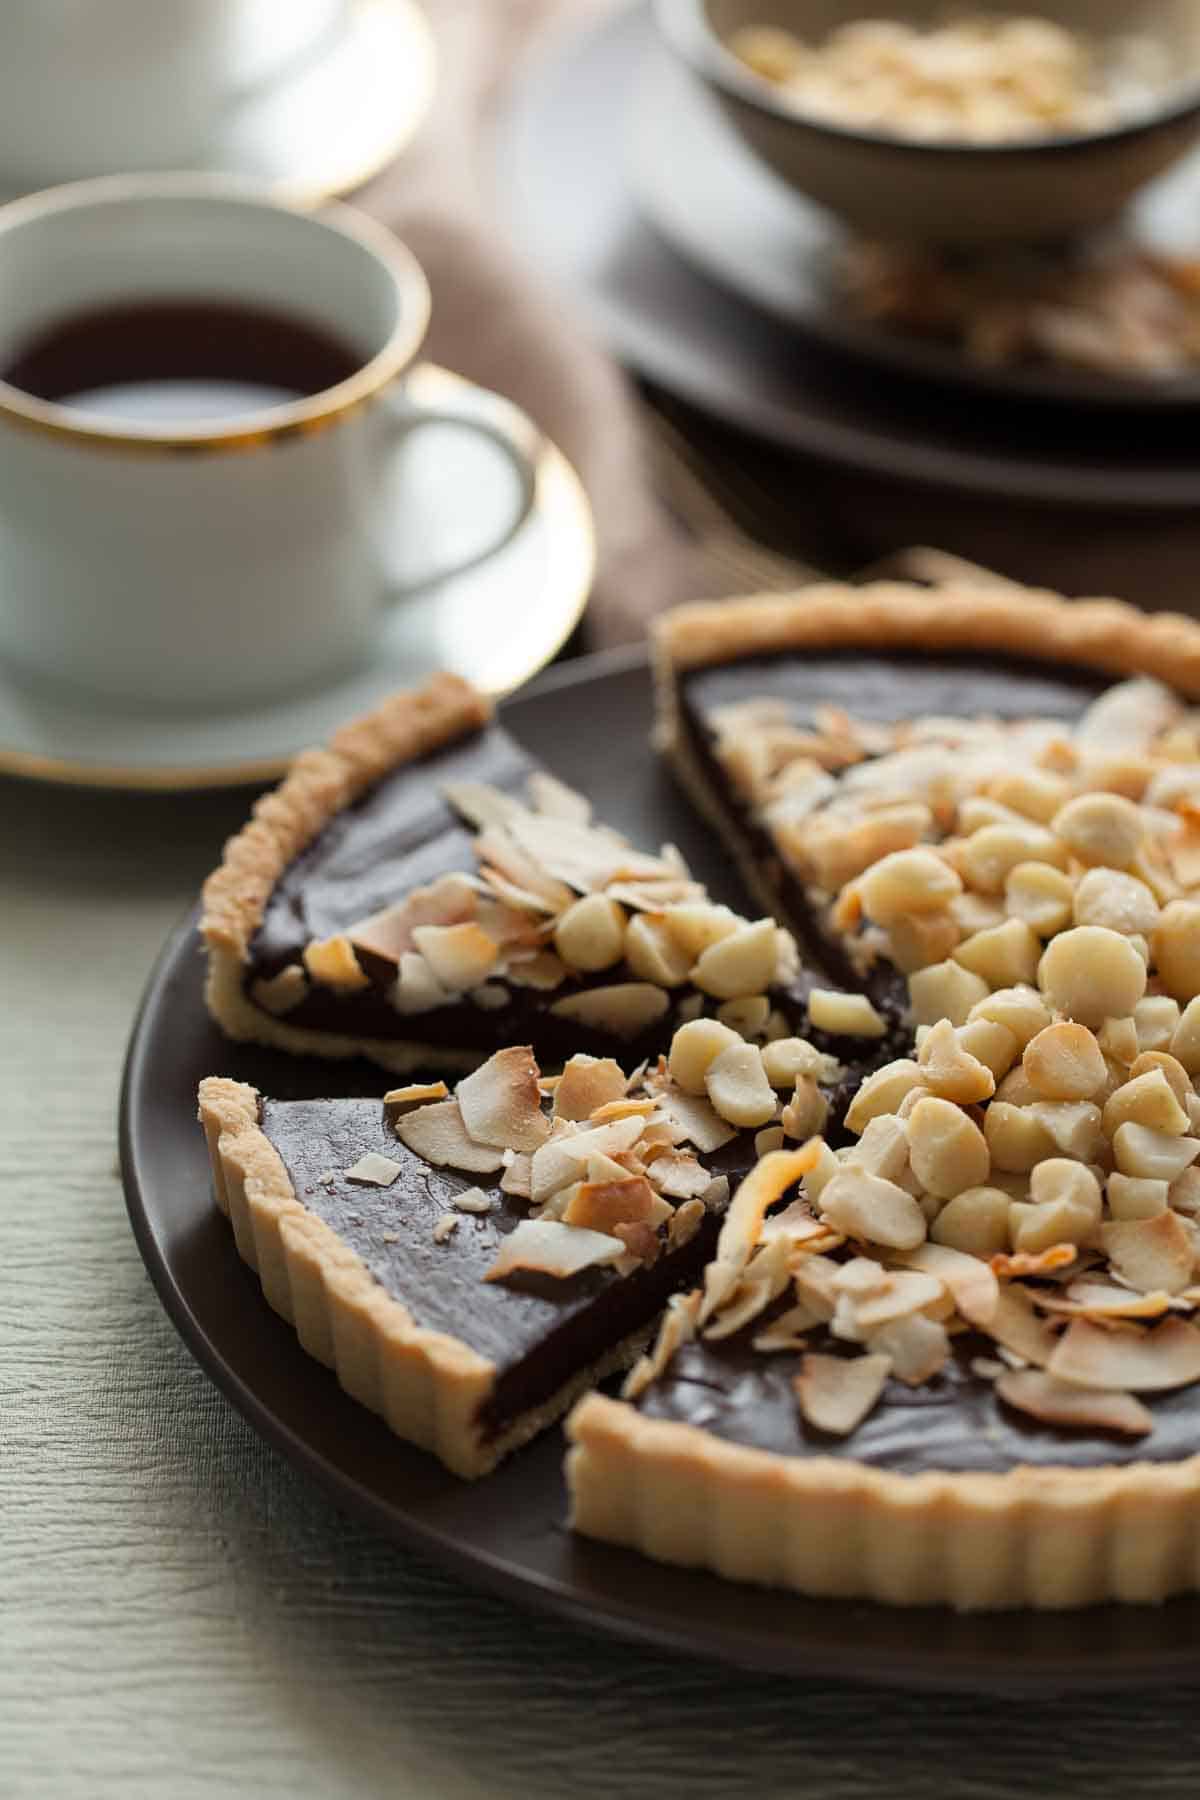 Chocolate Coconut Macadamia Nut Tart on Serving Plate with Coffee Cups and Plates